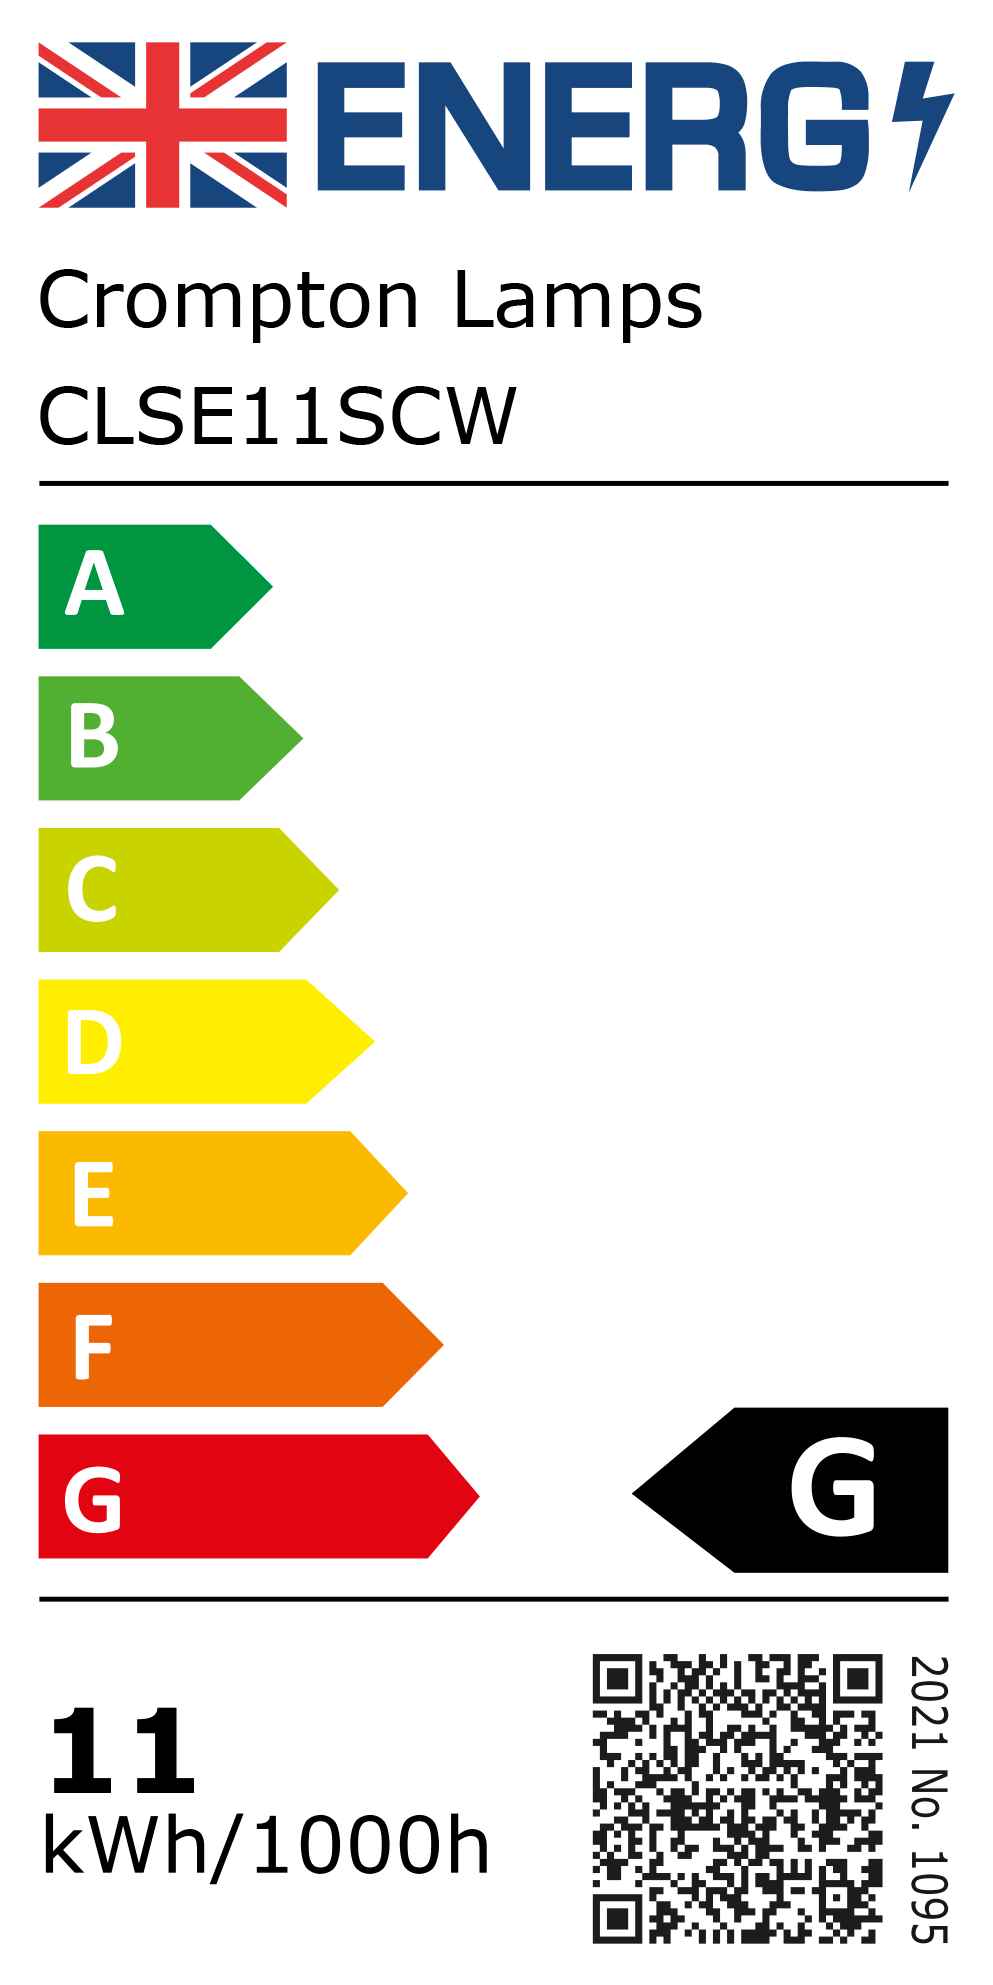 New 2021 Energy Rating Label: Stock Code CLSE11SCW